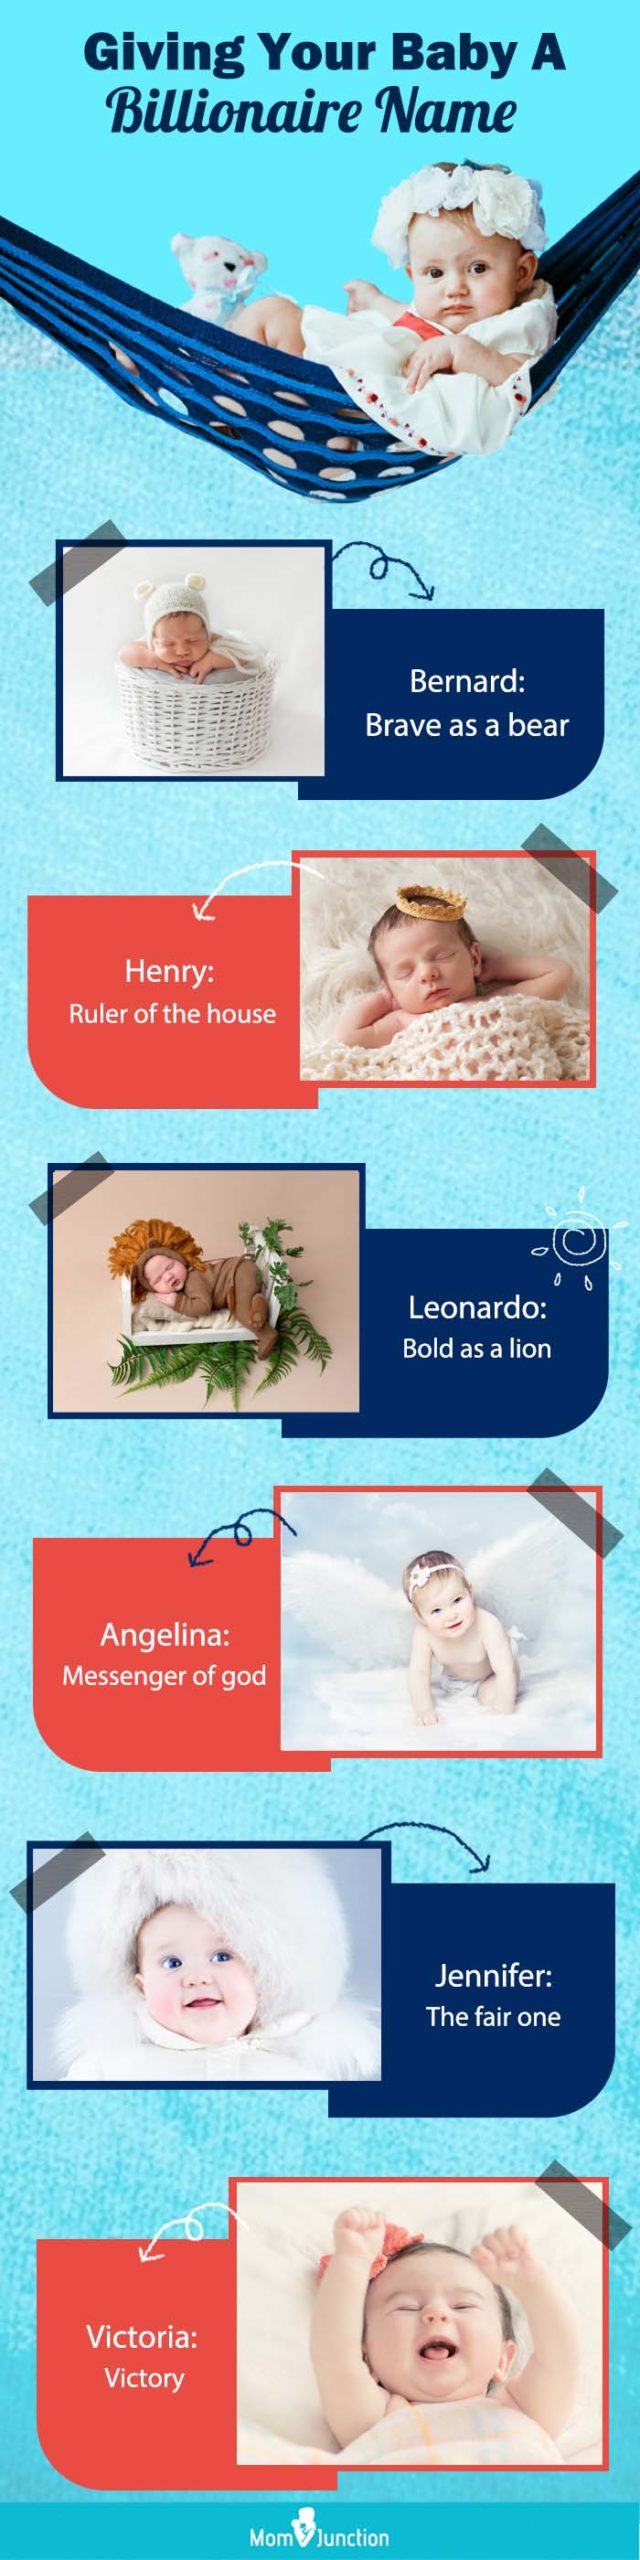 giving your baby a billionaire name (infographic)